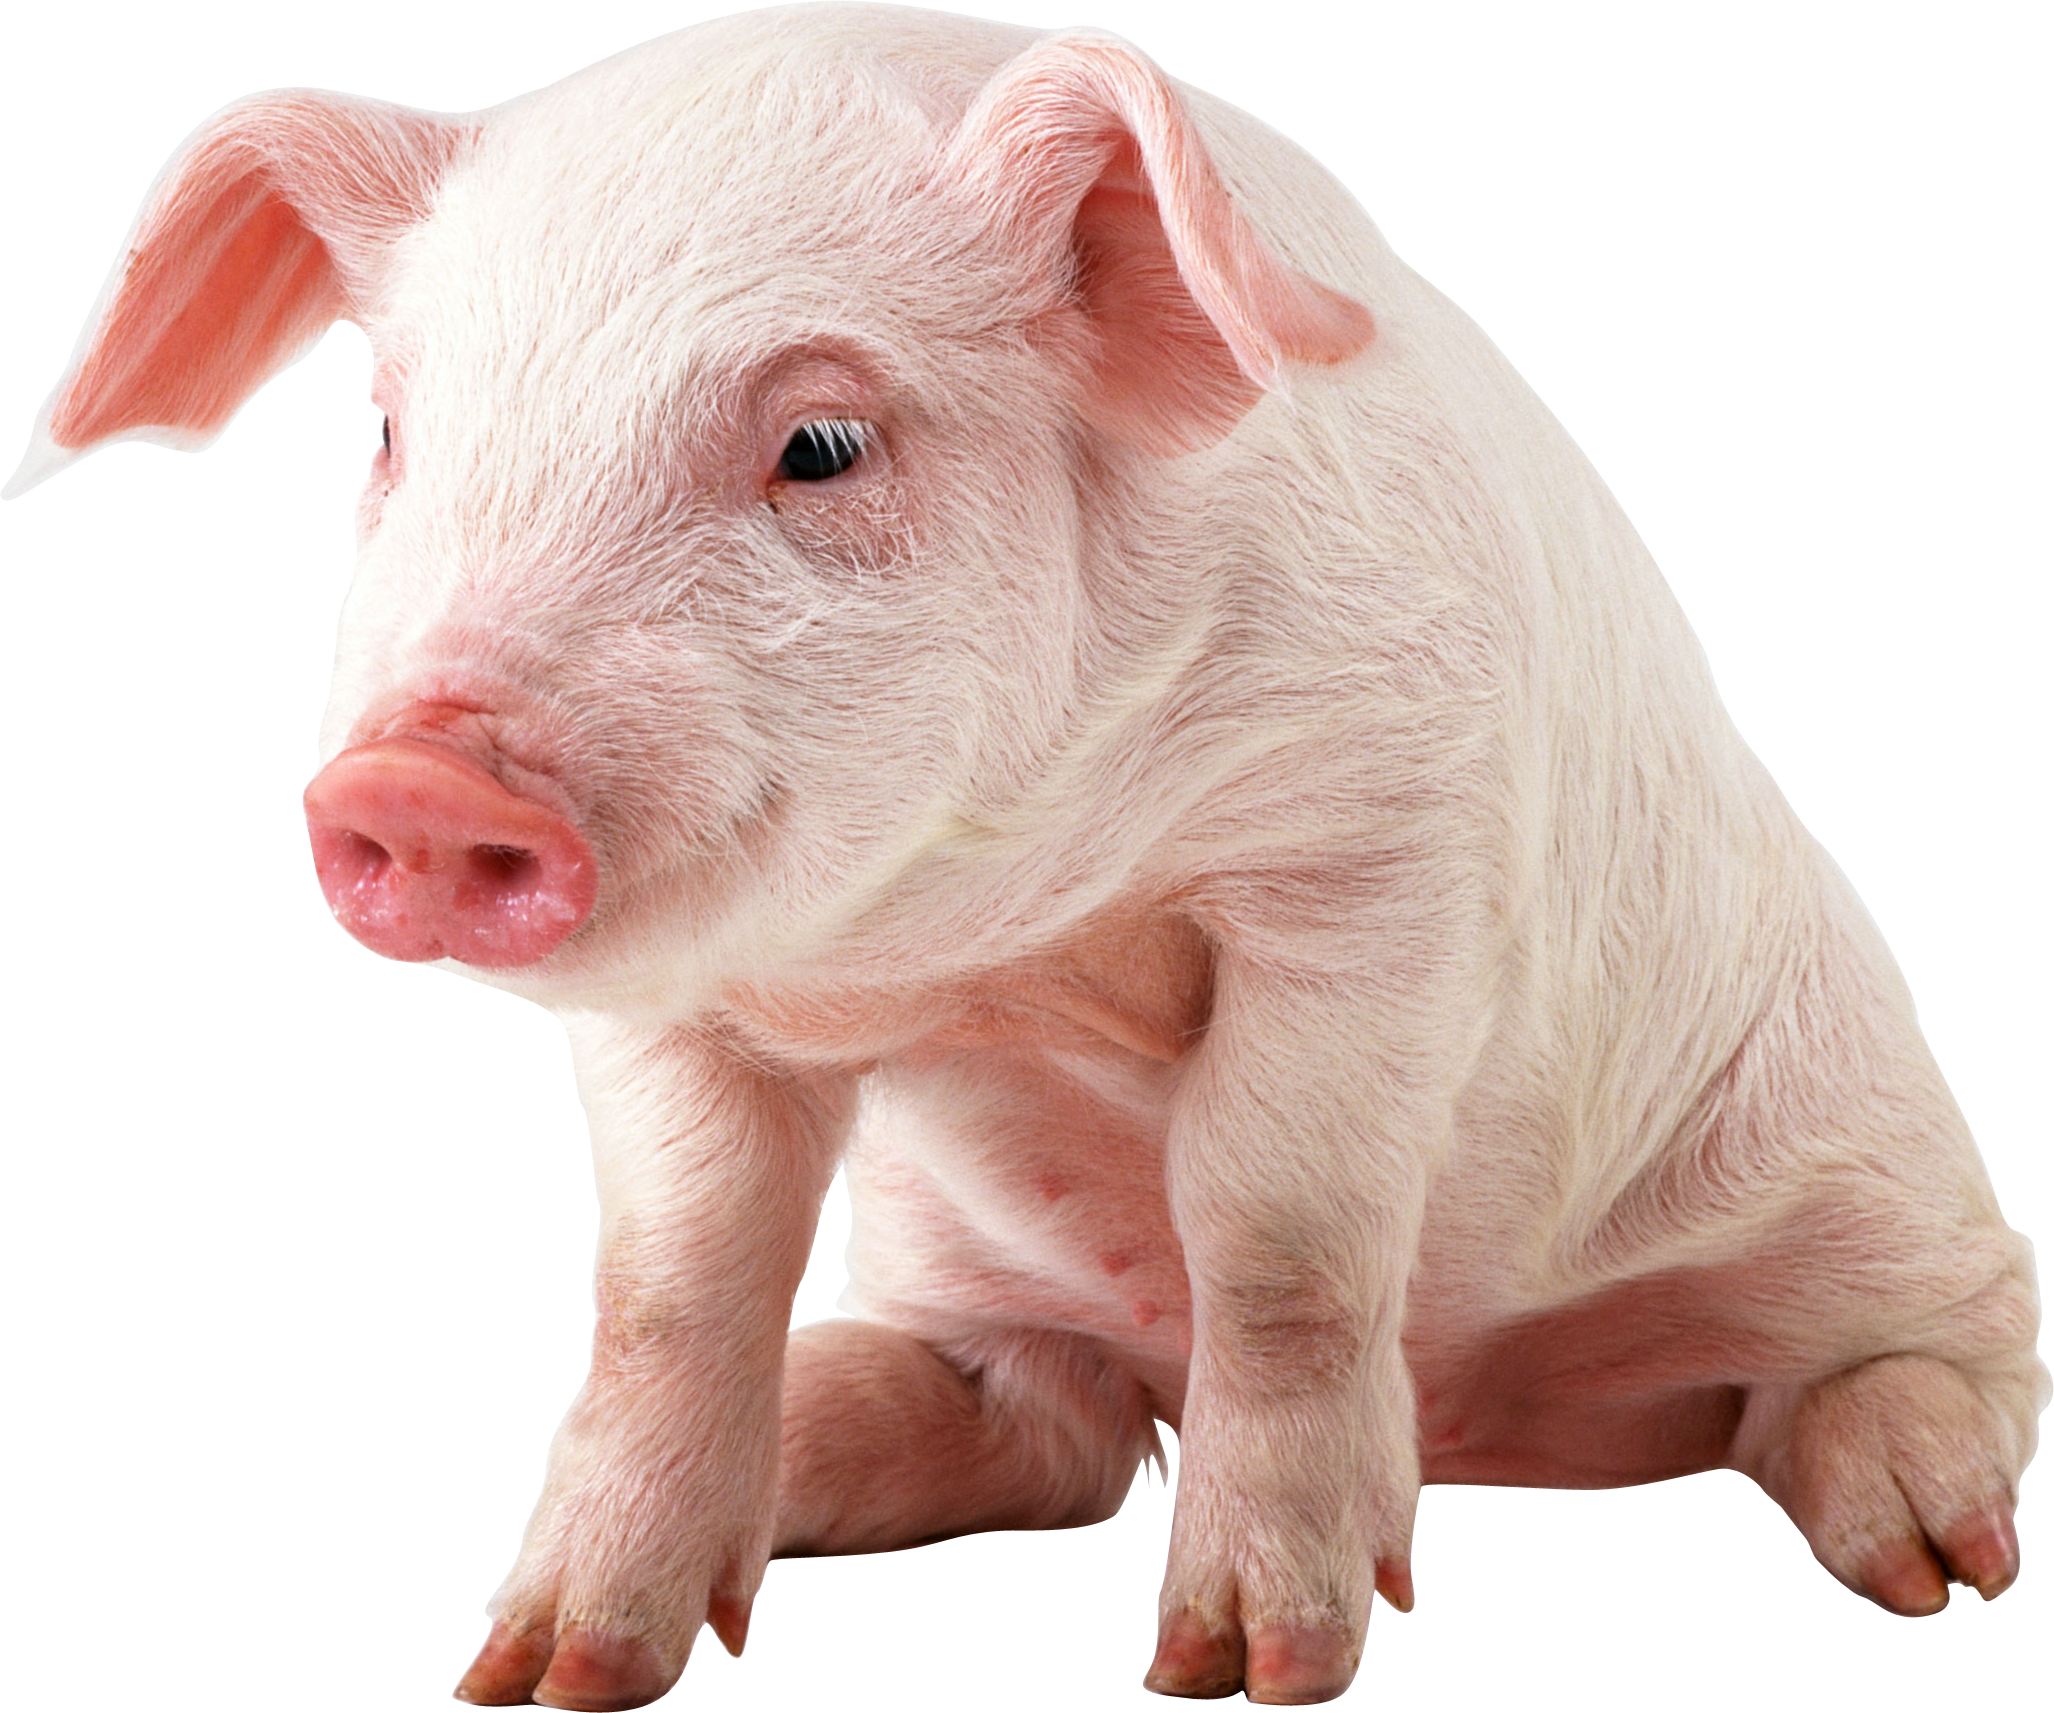 Baby Pig PNG HD - 129629